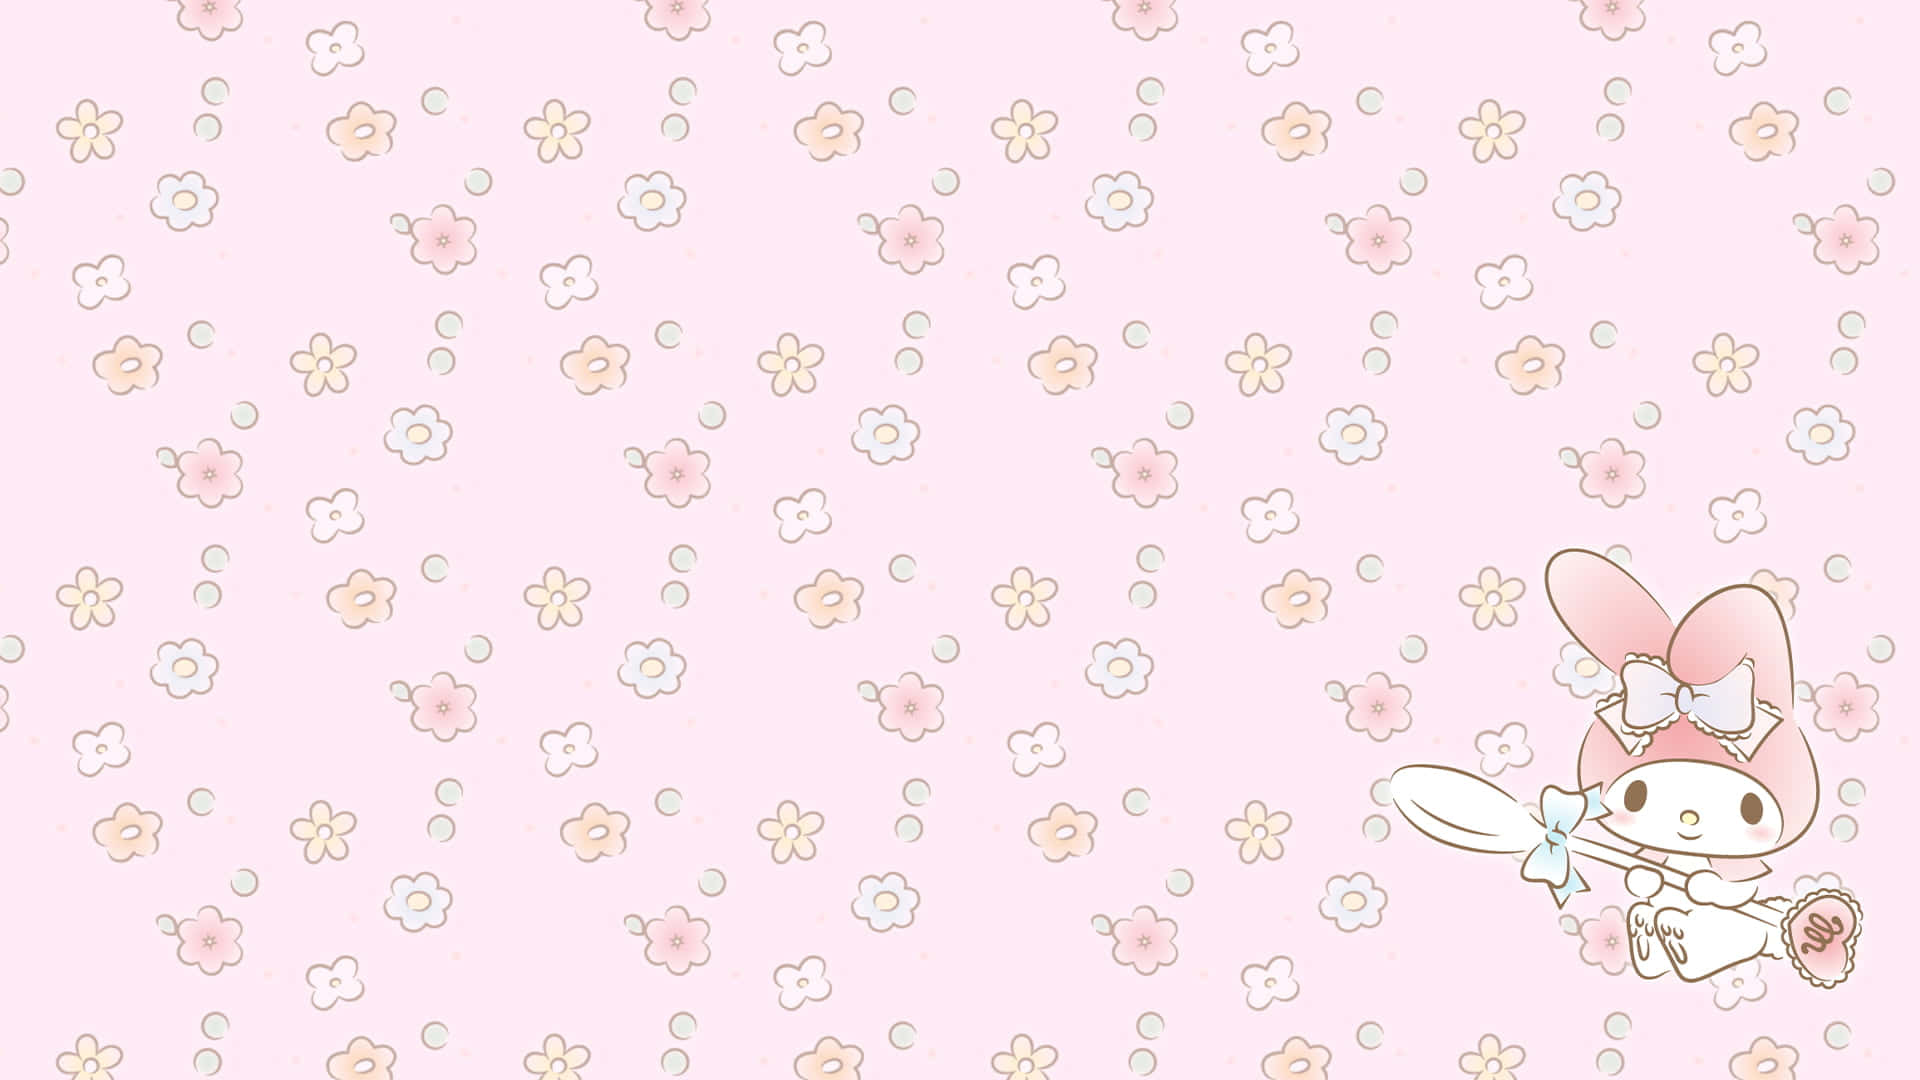 A Pink Wallpaper With A Cute Little Bunny Wallpaper